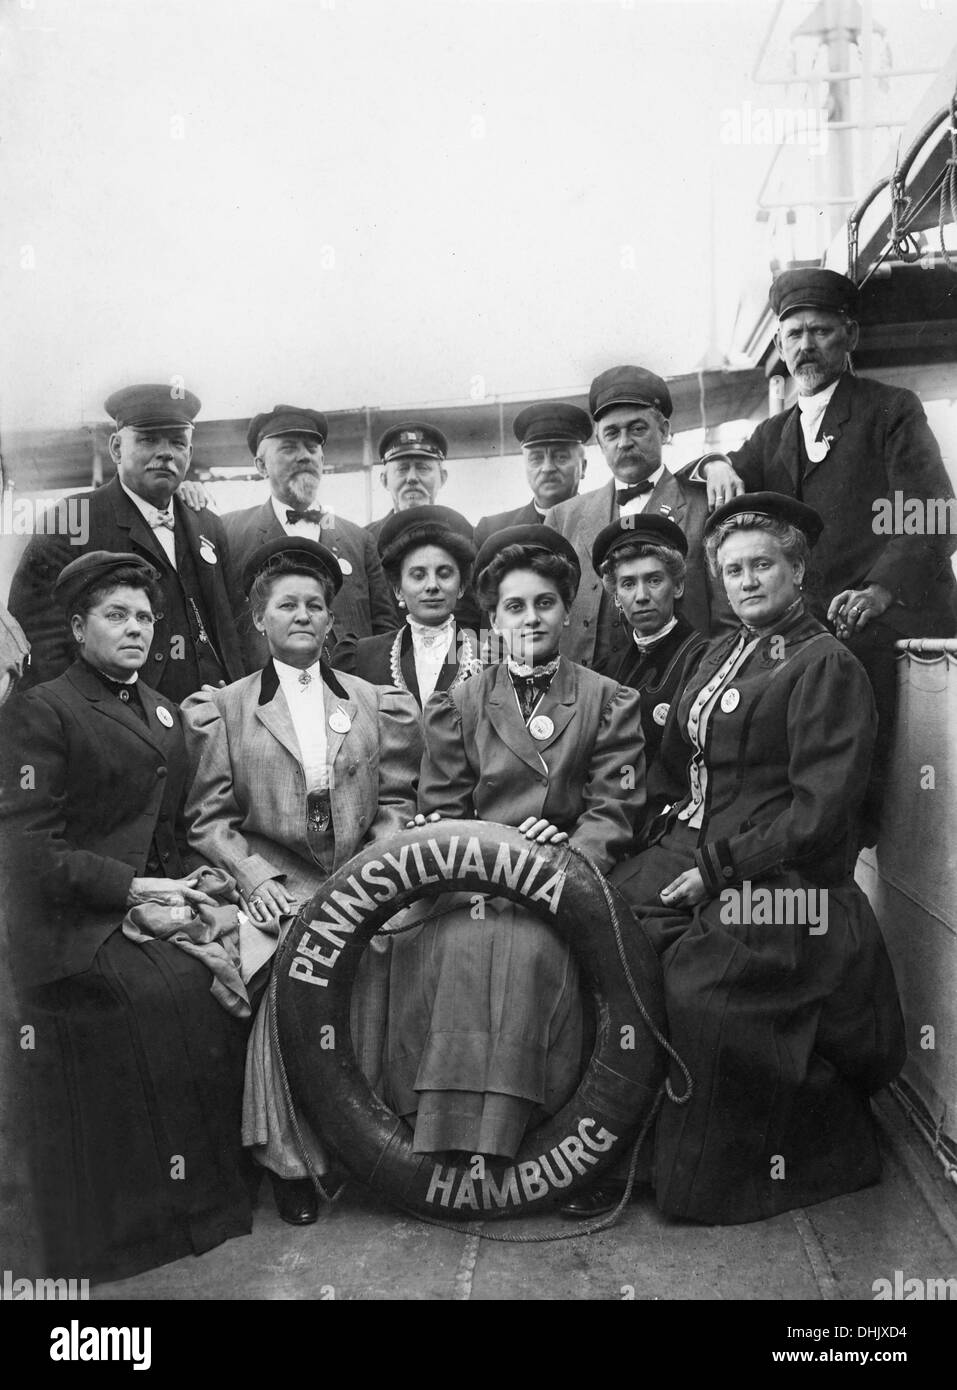 Group image of women and men aboard the passenger liner Pennsylvania, undated photograph (1911). The image was taken by the German photographer Oswald Lübeck, one of the earliest representatives of travel photography and ship photography aboard passenger ships. Photo: Deutsche Fotothek/Oswald Lübeck Stock Photo